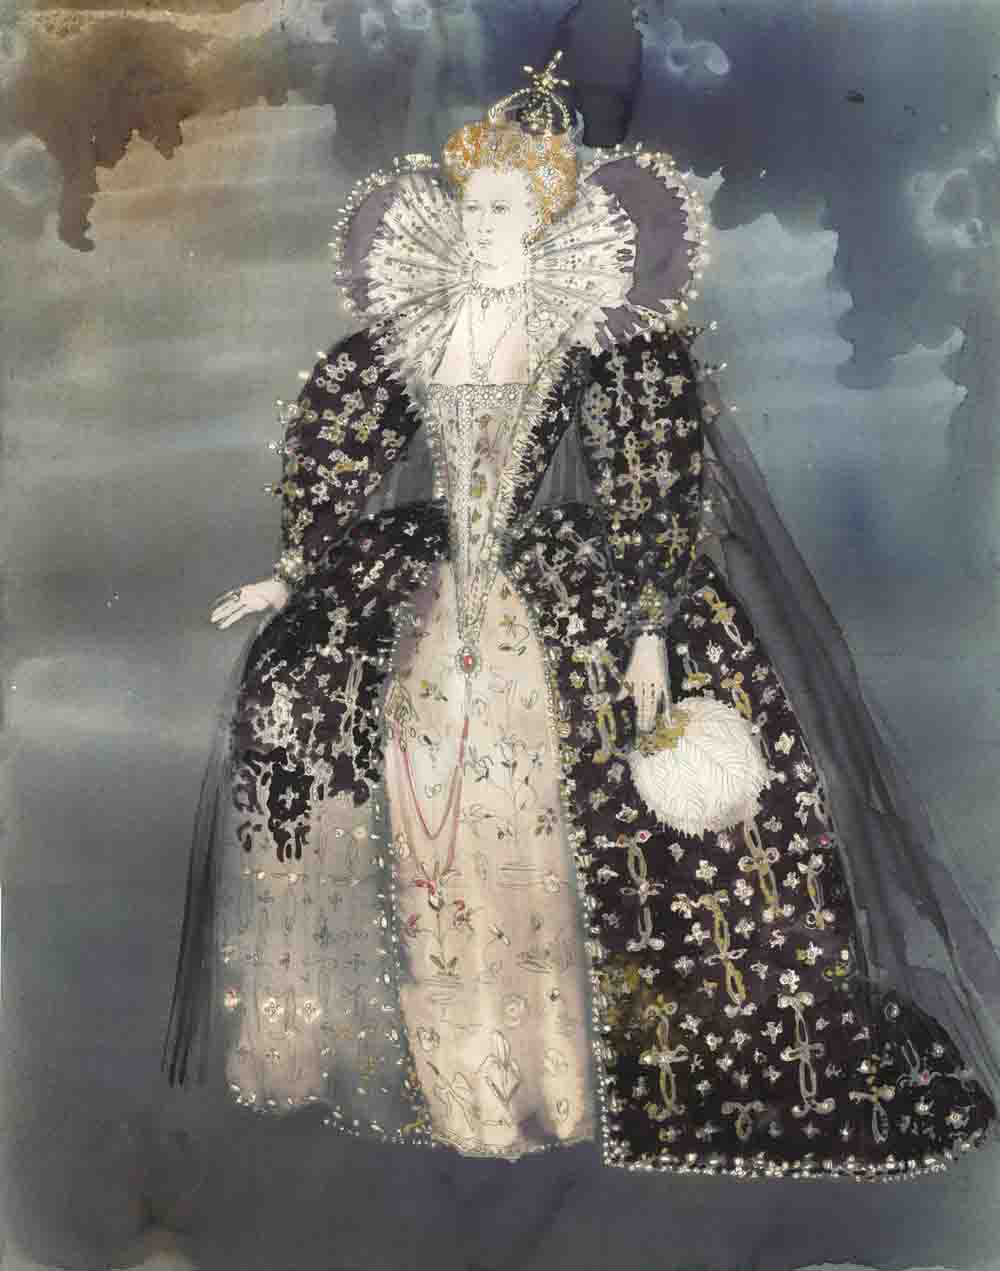 Sketch for Lynn Redgrave as Queen Elizabeth I, Lost Colony – The Queen’s Garden, 19 x 24 inches